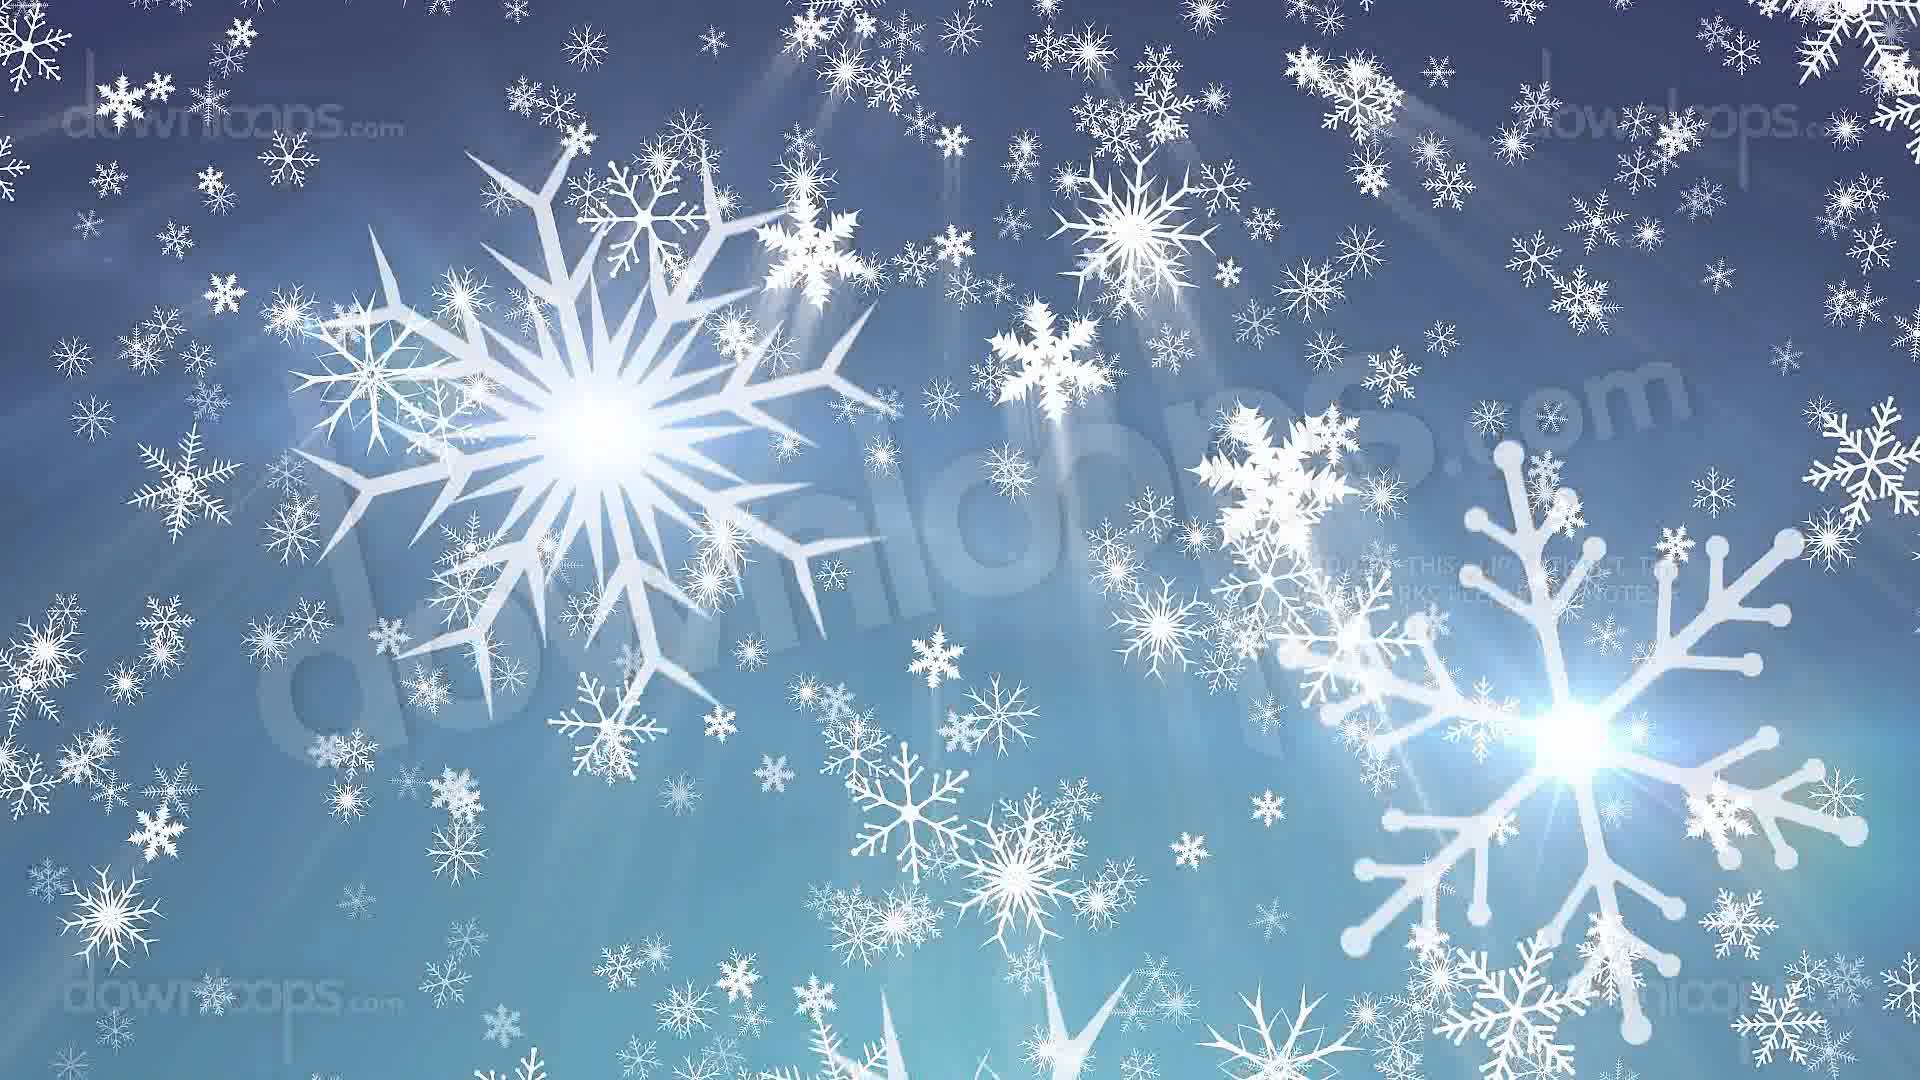 Top Animated Snow Desktop Wallpaper Download  The ultimate guide 